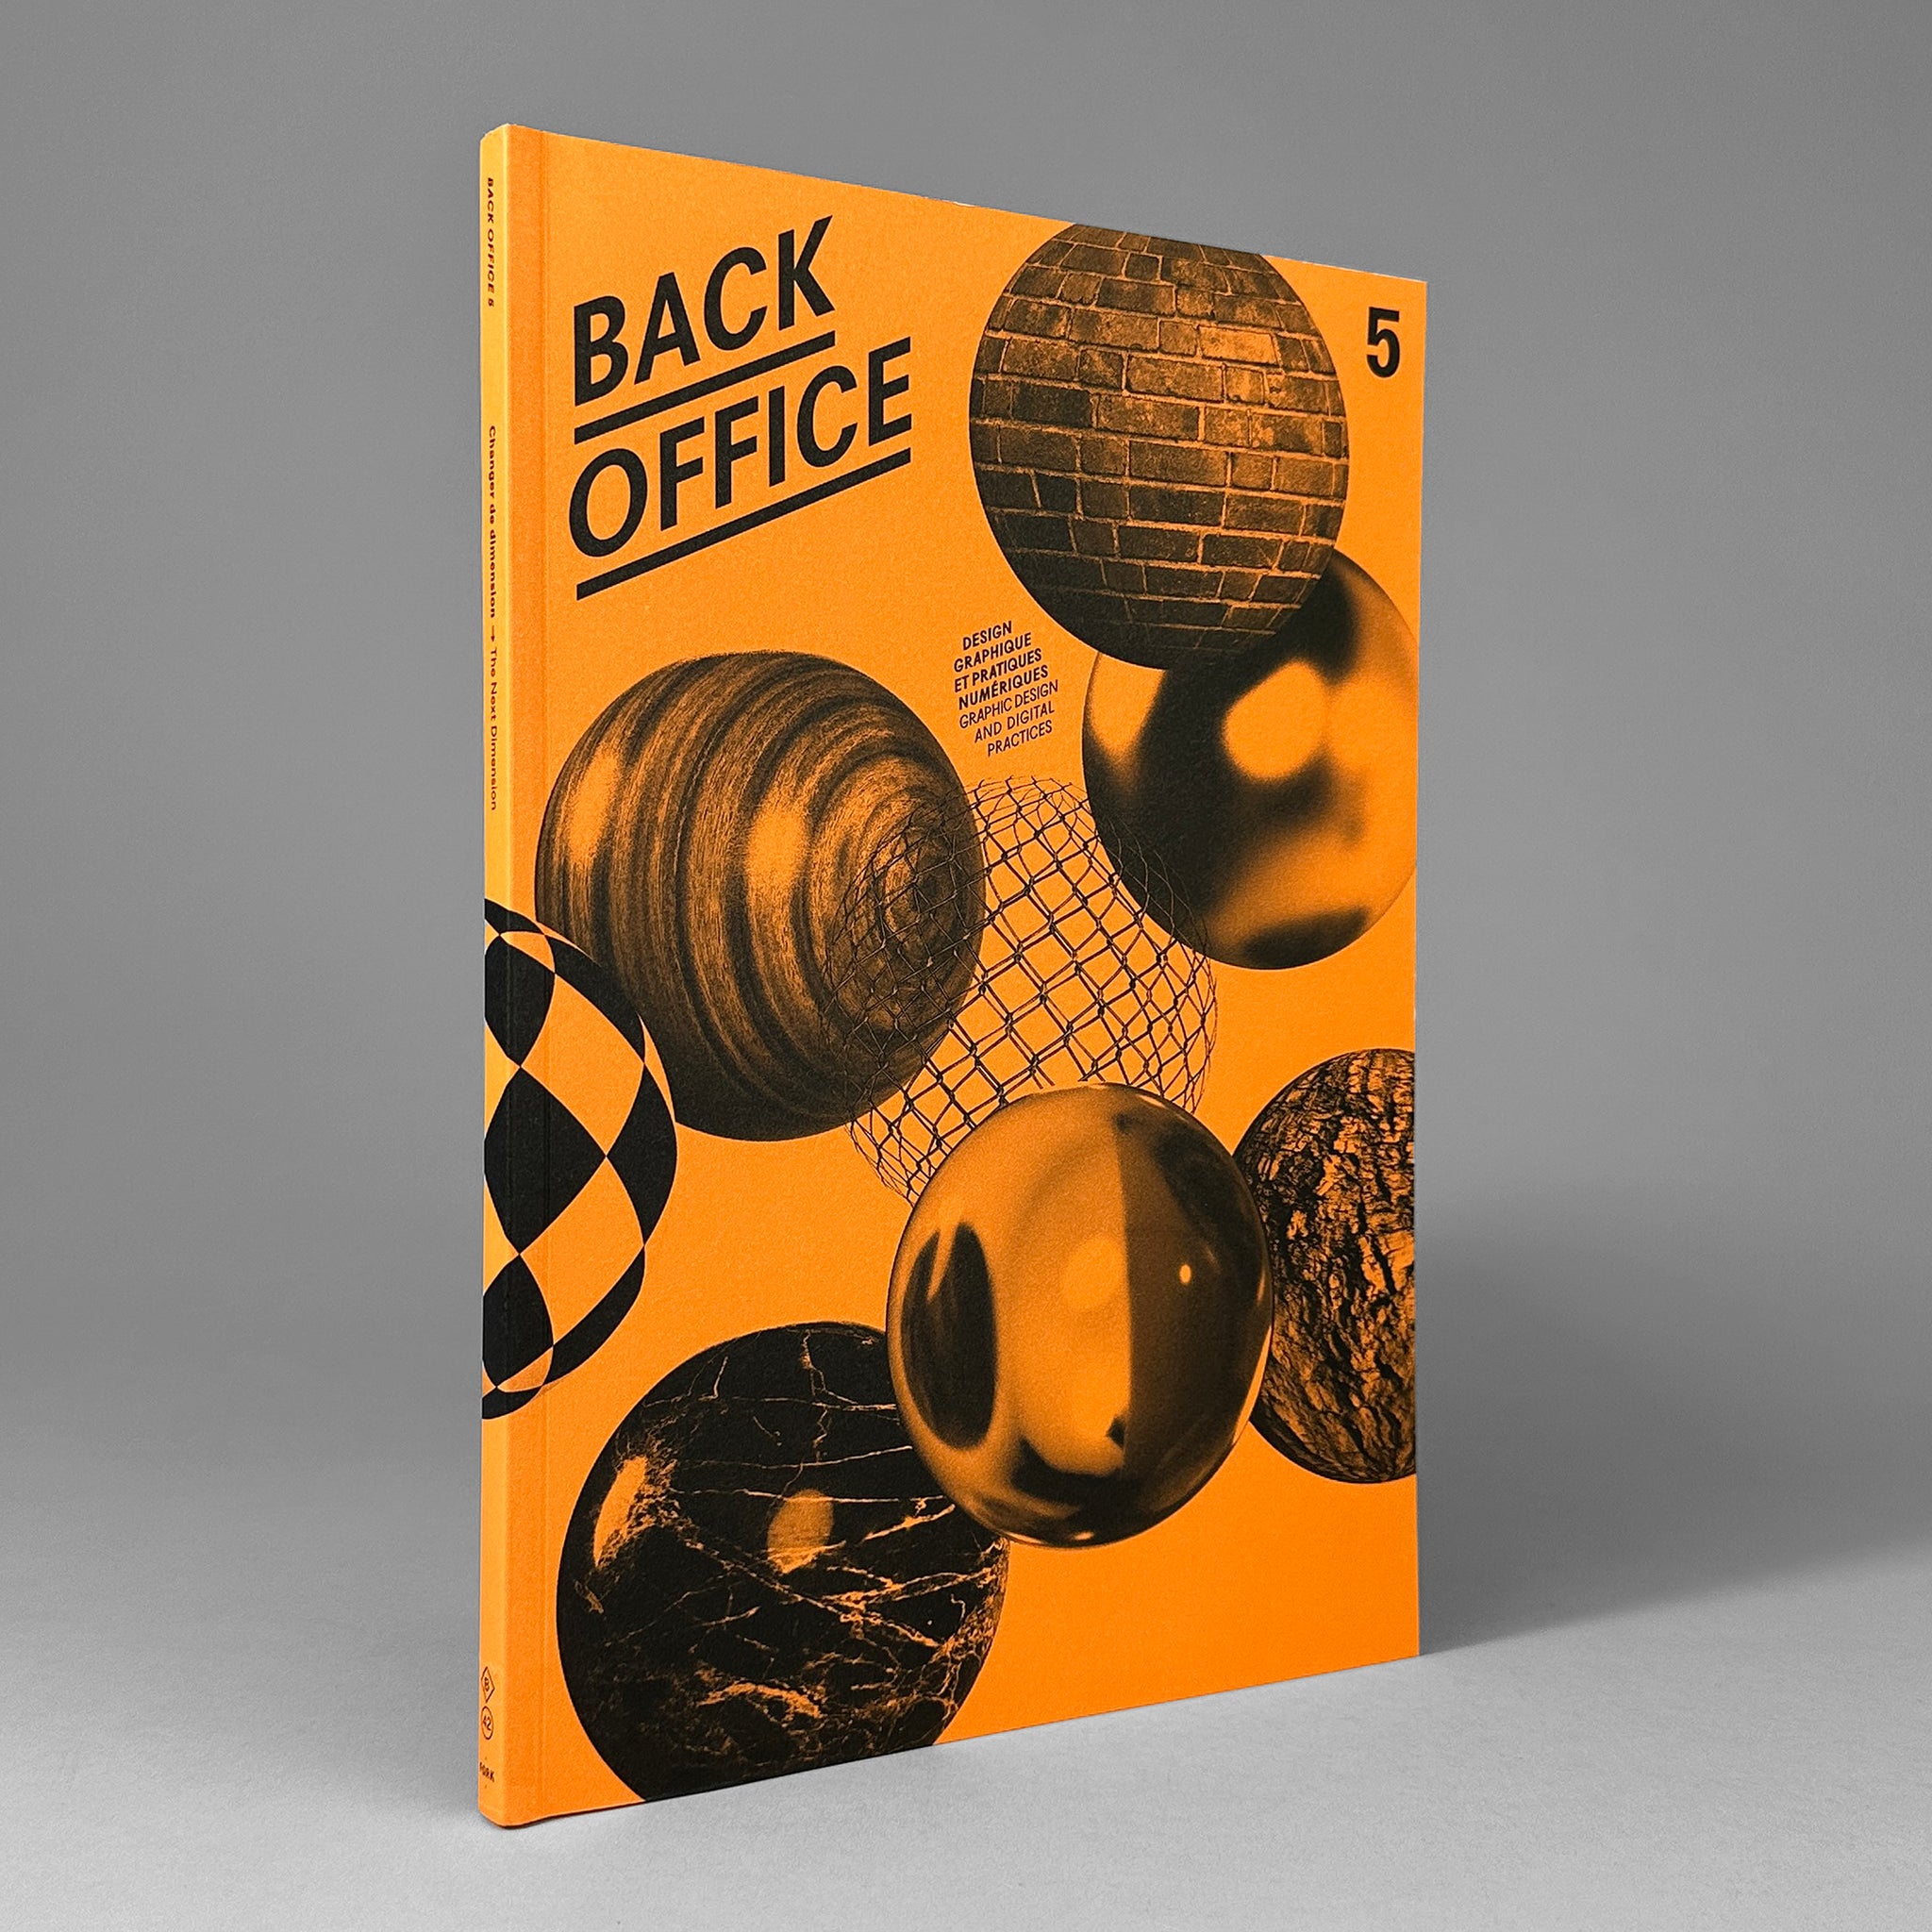 Back Office 5: Graphic Design and Digital Practices